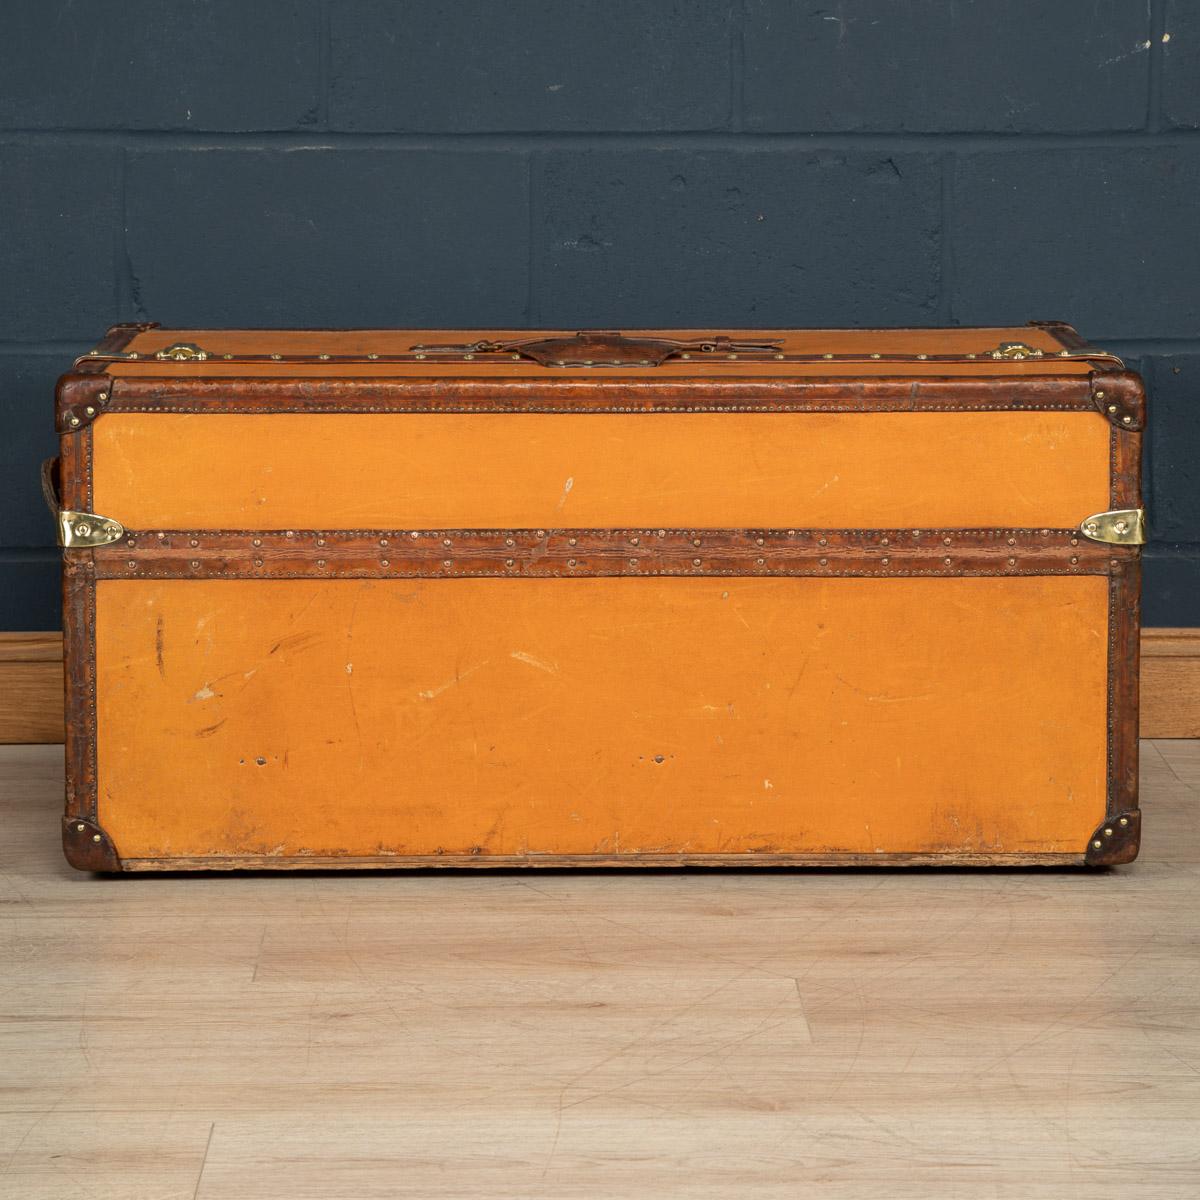 A very rare Louis Vuitton “Ideal” trunk (from French “Malle Idéale”), circa 1900's, features orange “Vuittonite“ canvas, all brass hardware, and leather trims. This model was initially introduced as the ‘Perfect Trunk’. The double-topped wardrobe